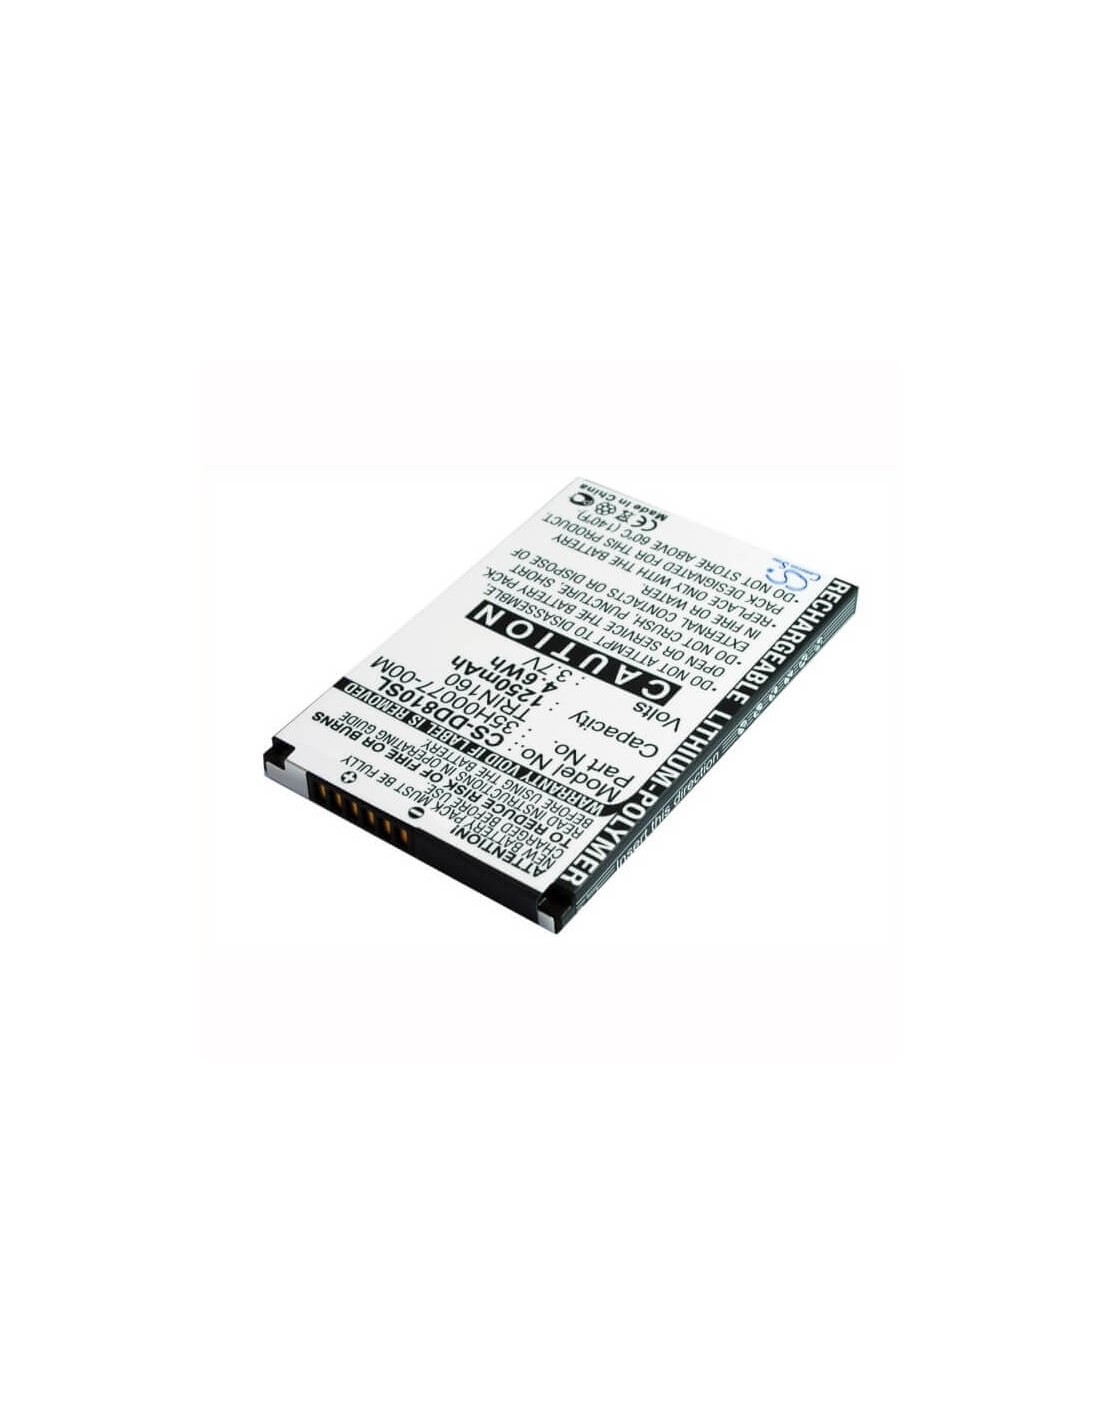 Battery for HTC P3600, HTC P3600i, P4000 3.7V, 1250mAh - 4.63Wh